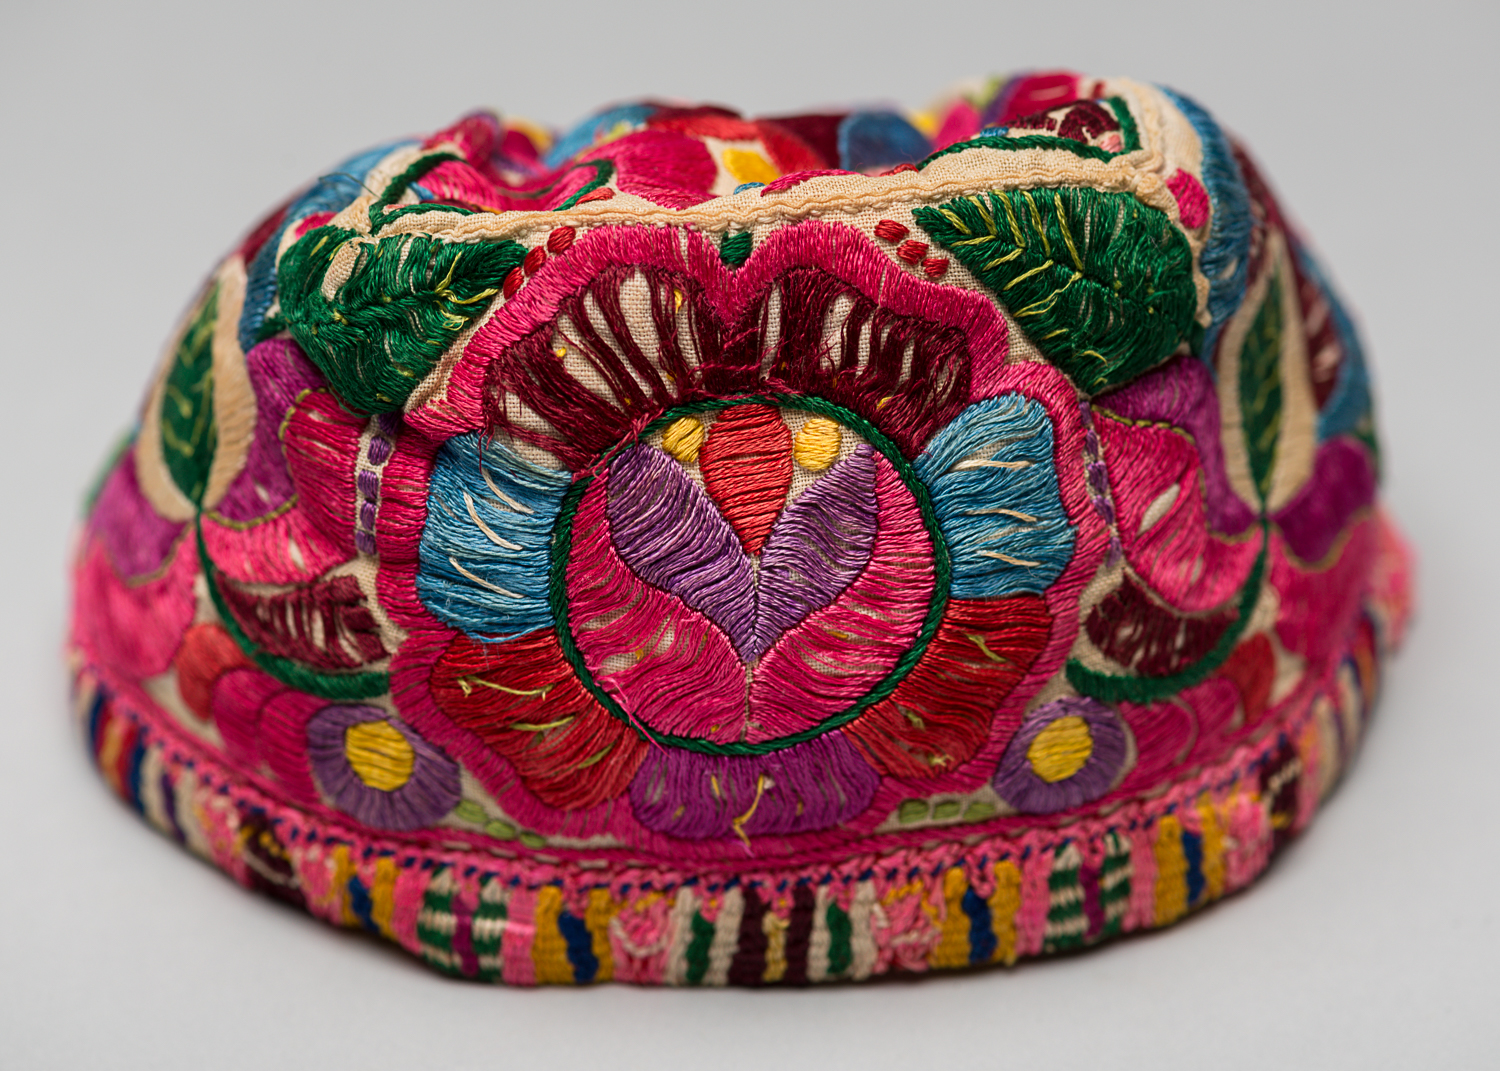 The doll's hat is also intricately embroidered. (Photo: Peter Berra)